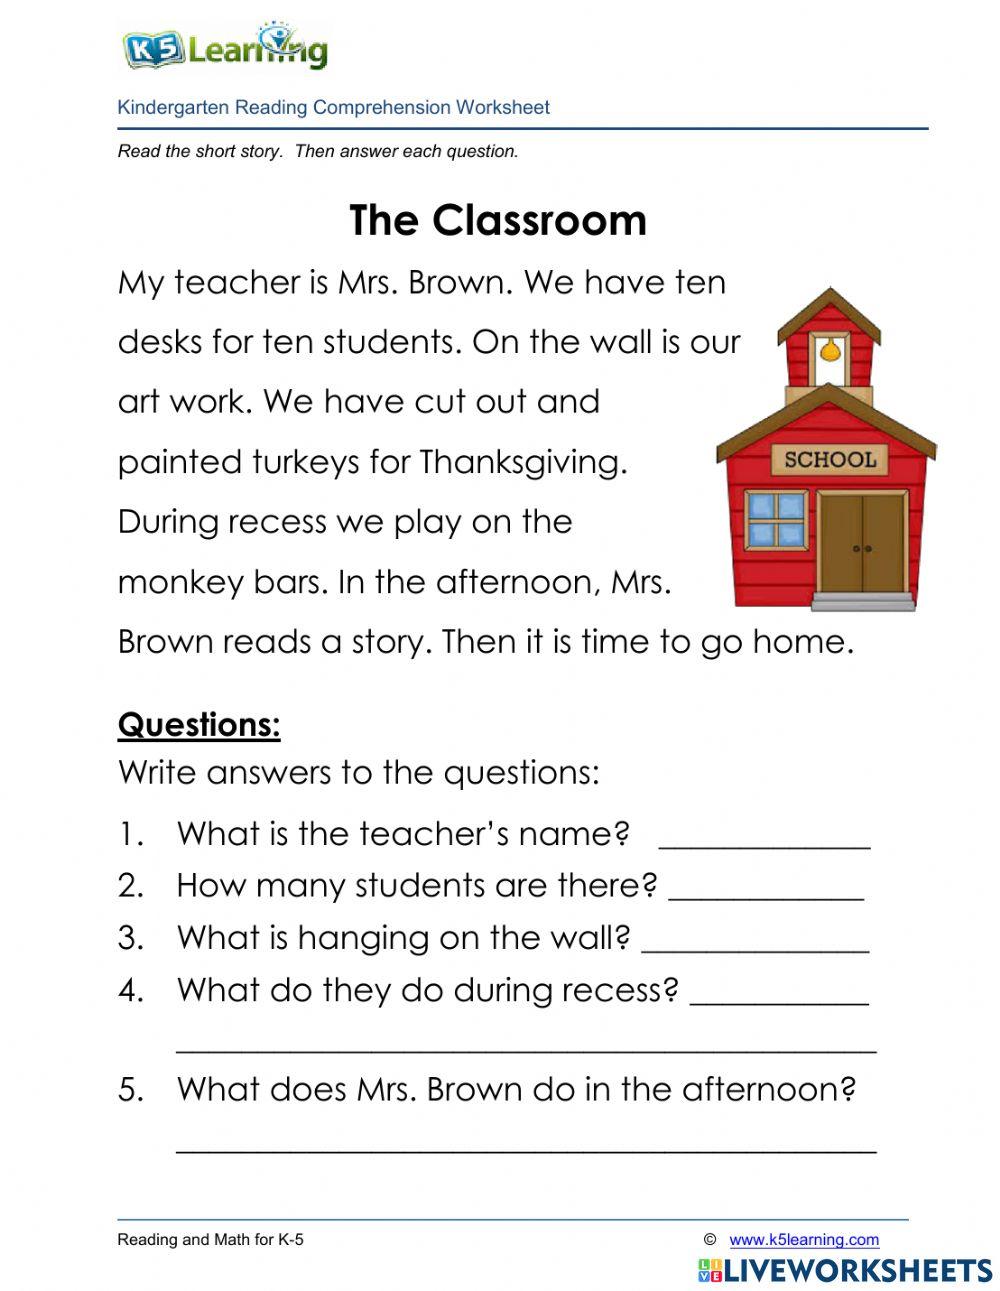 The Classroom  Reading comprehension 